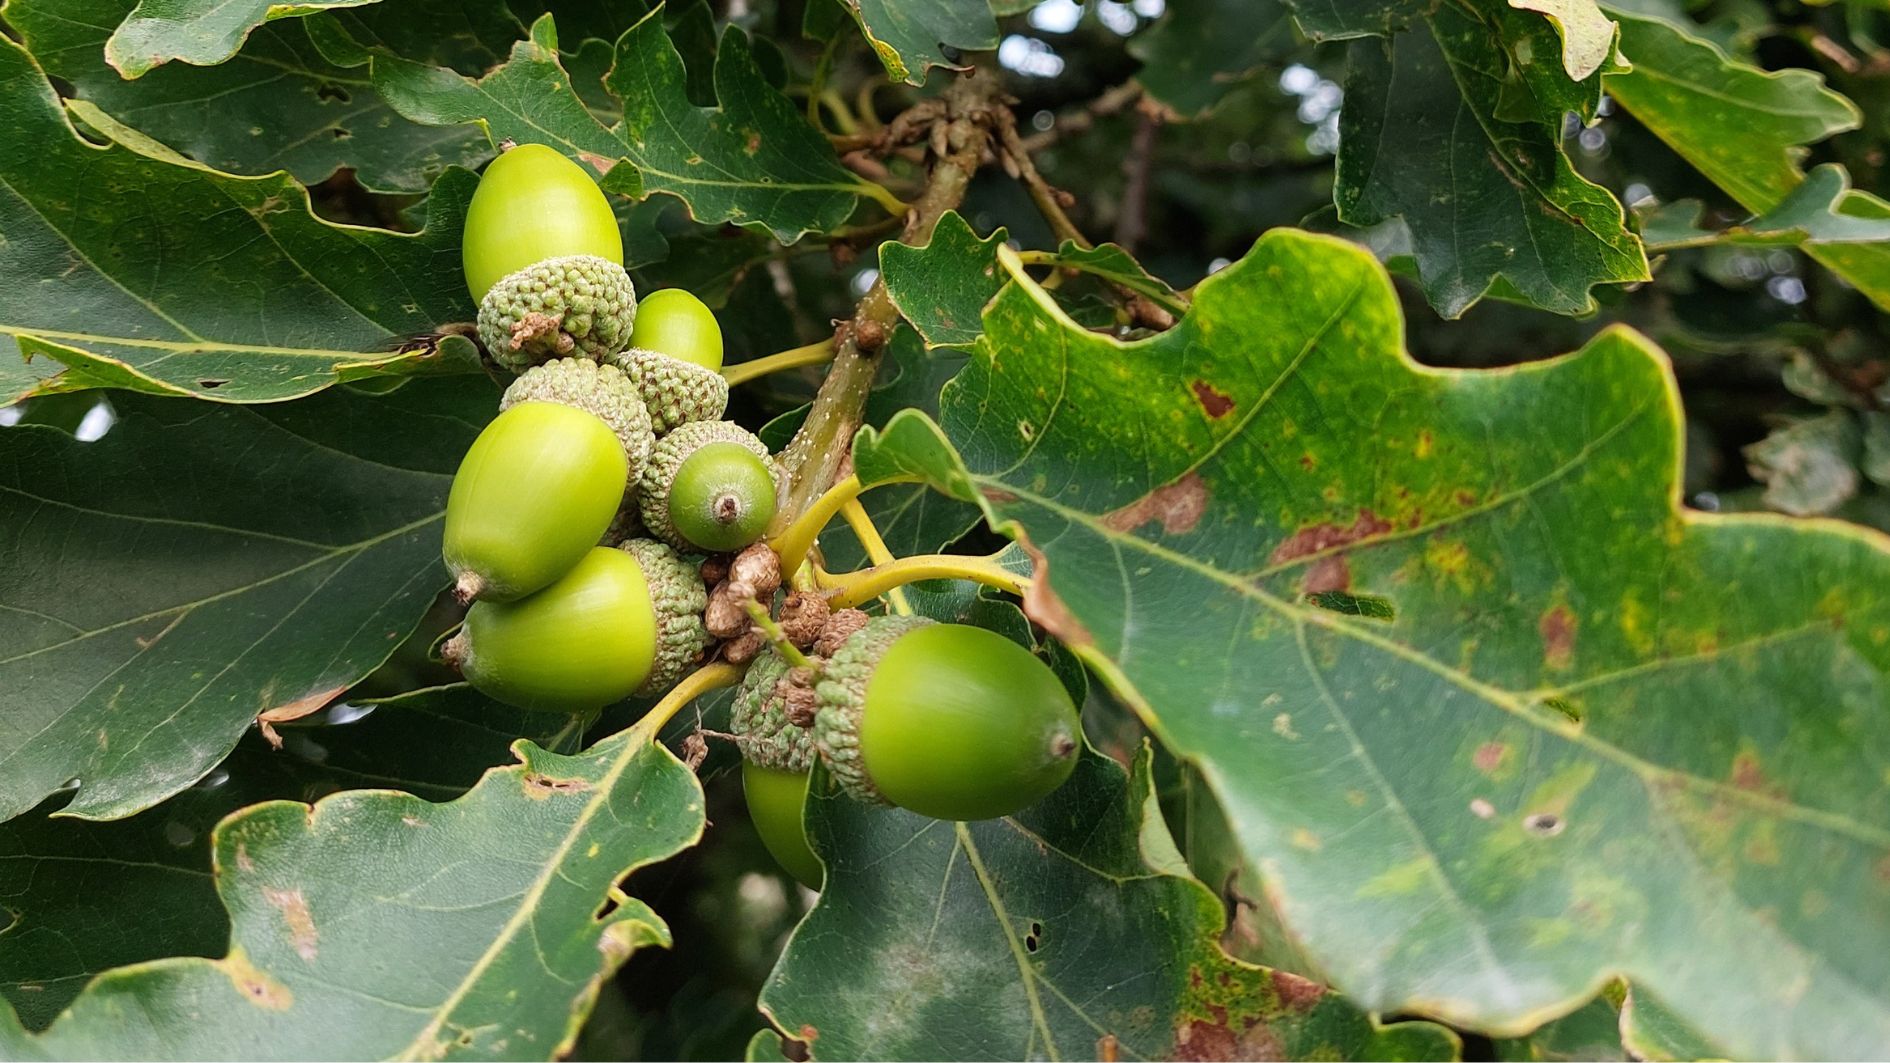 Tree seeds, fruits, or nuts?